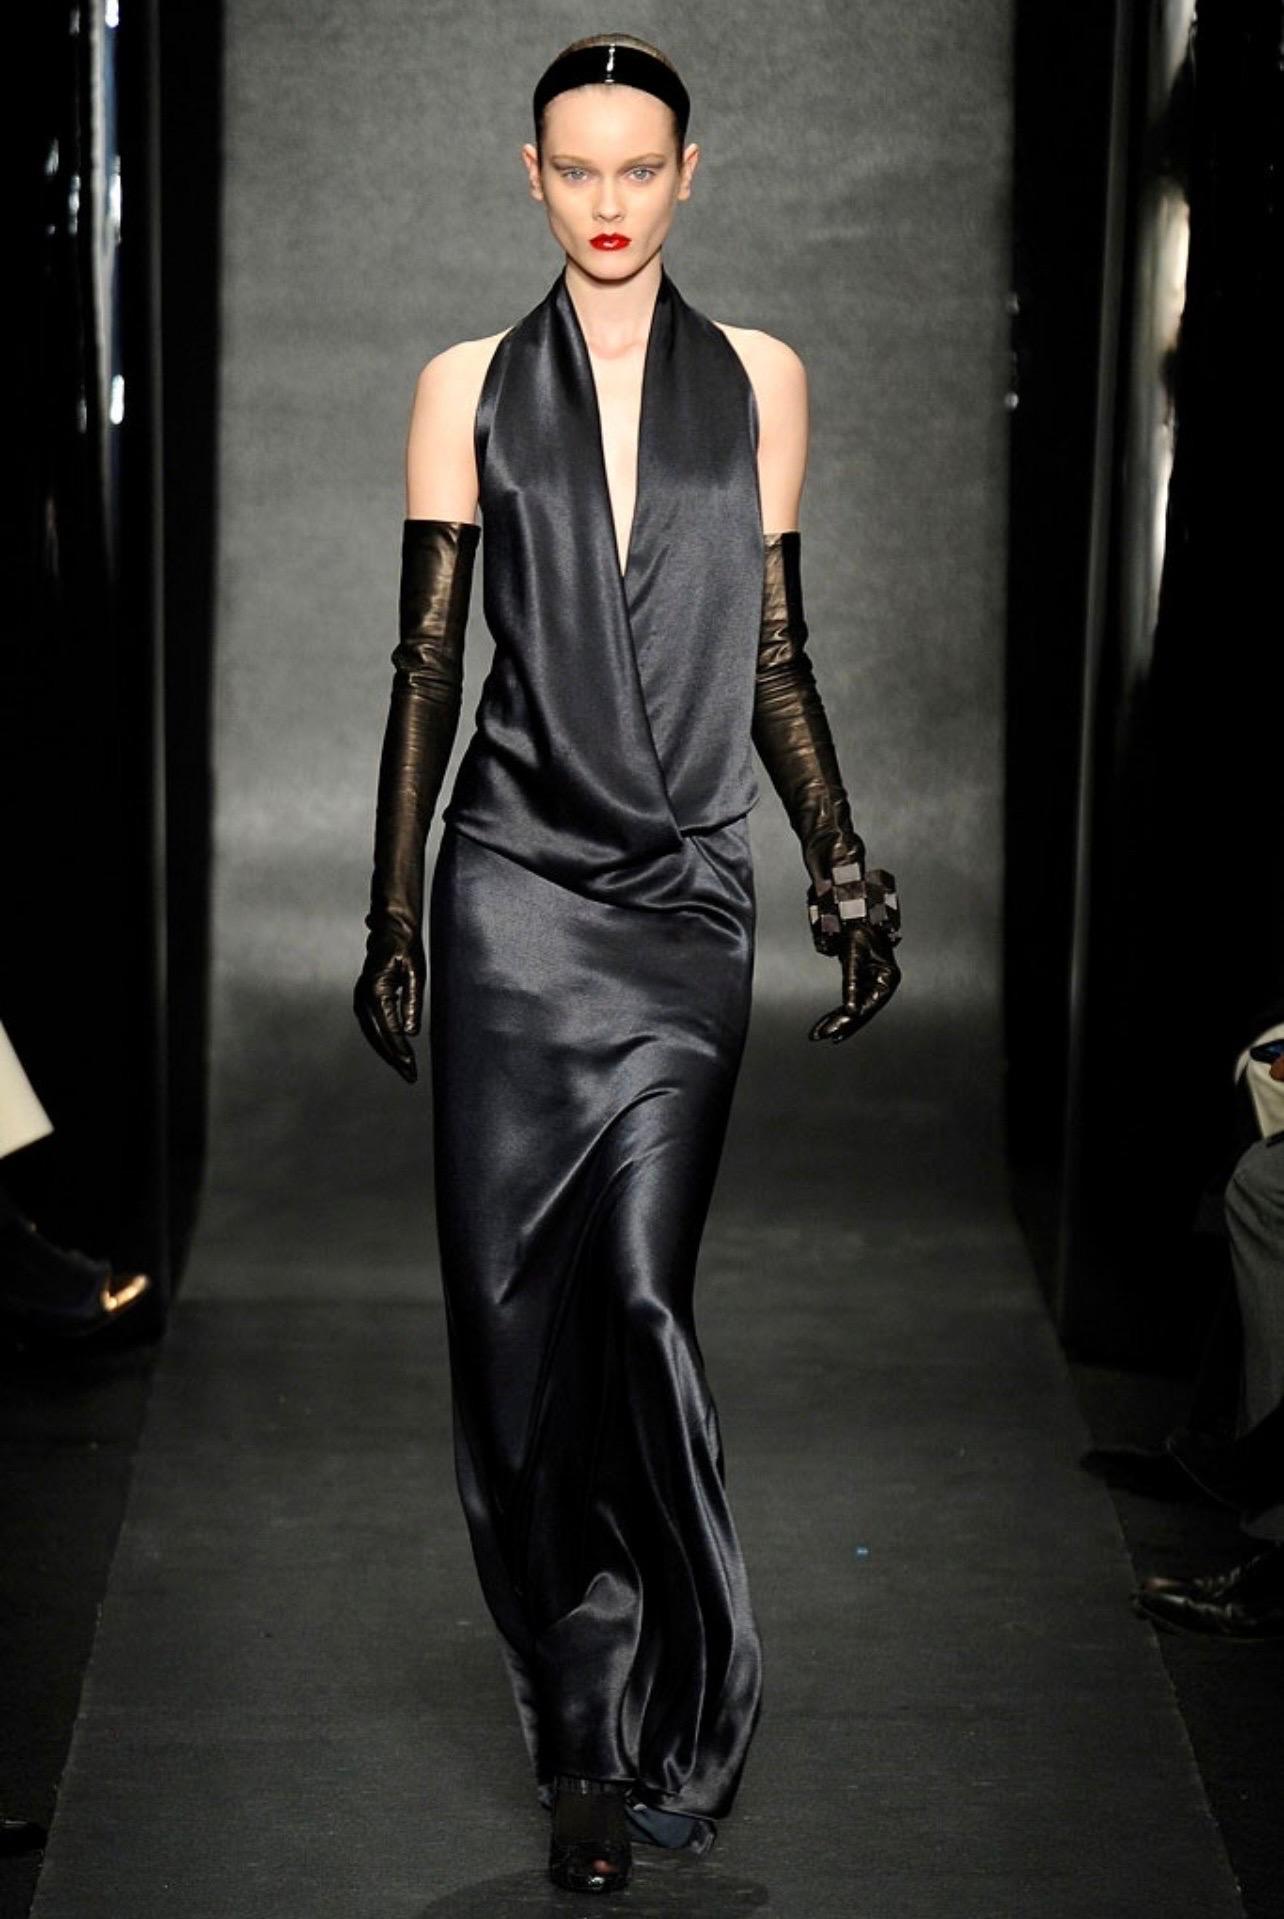 Brand new with tags sexy DONNA KARAN Fall 2010 Runway Size 10 anthracite / dark grey silk, rayon and spandex plunging gown ! Simply slips over the head. Drapes the body beautifully and is extremely flattering. Retailed for $3,295 in 2010, which is